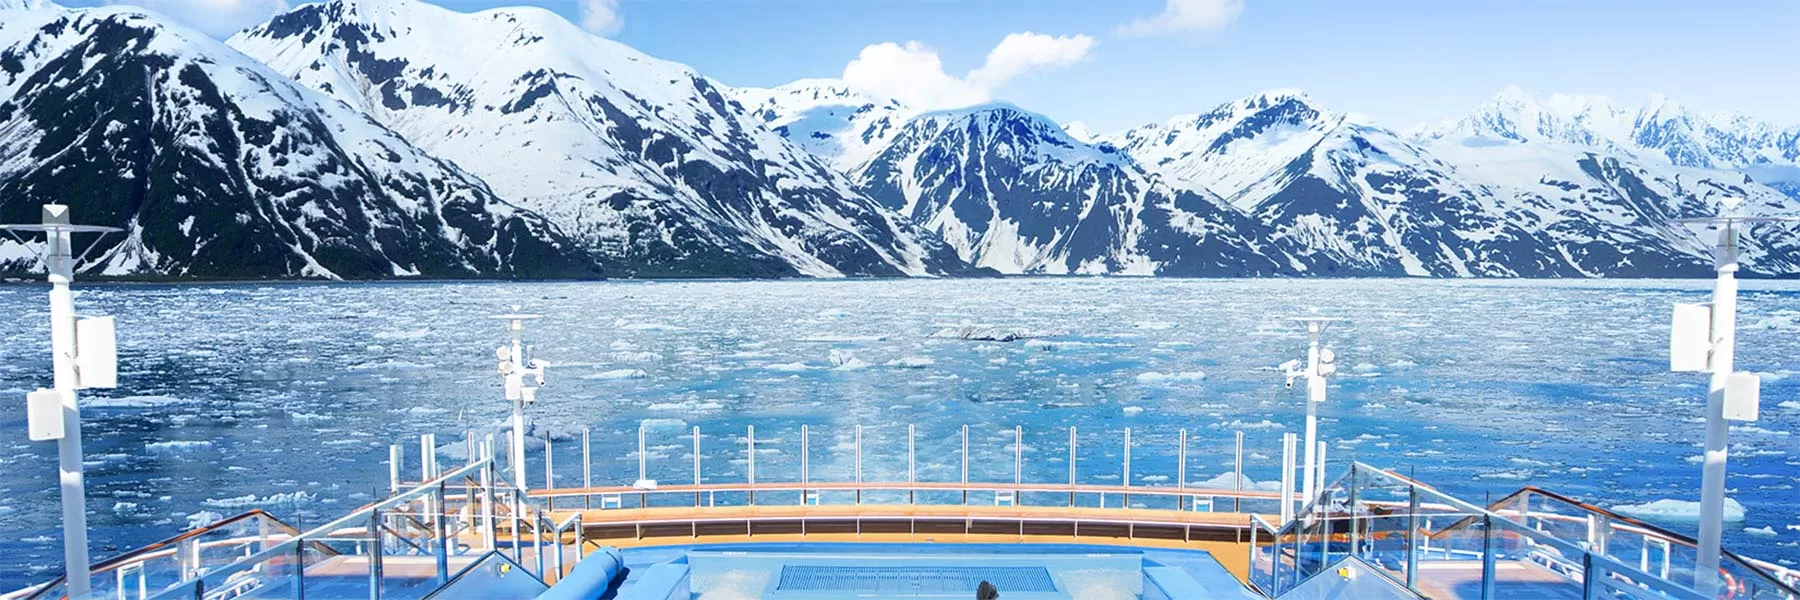 All you need to know about Alaska cruises